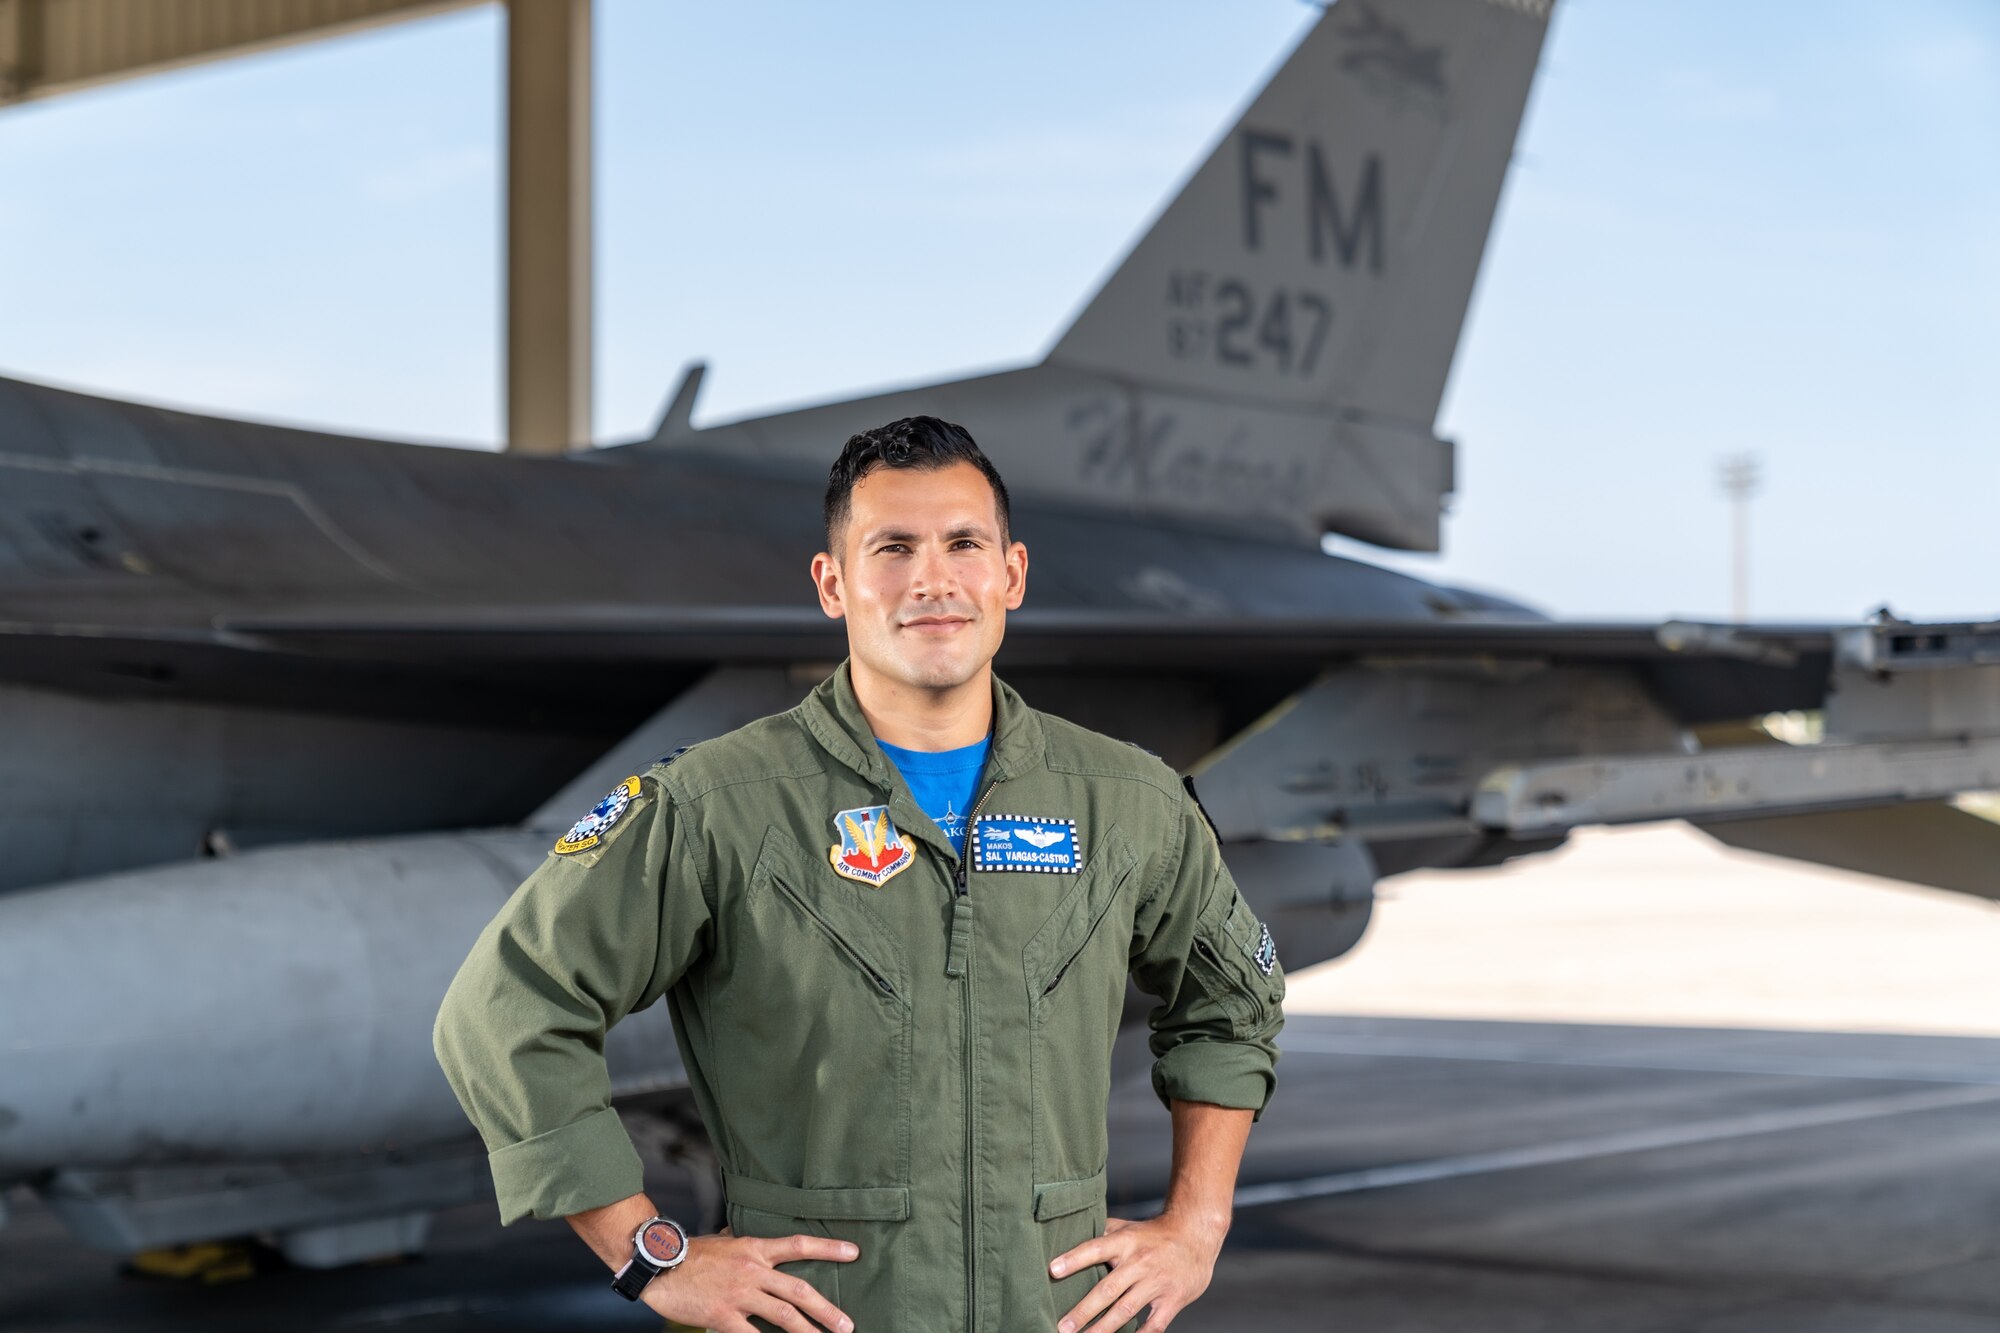 49th Fighter Group Fighter Pilot serves at Homestead Air Reserve Base